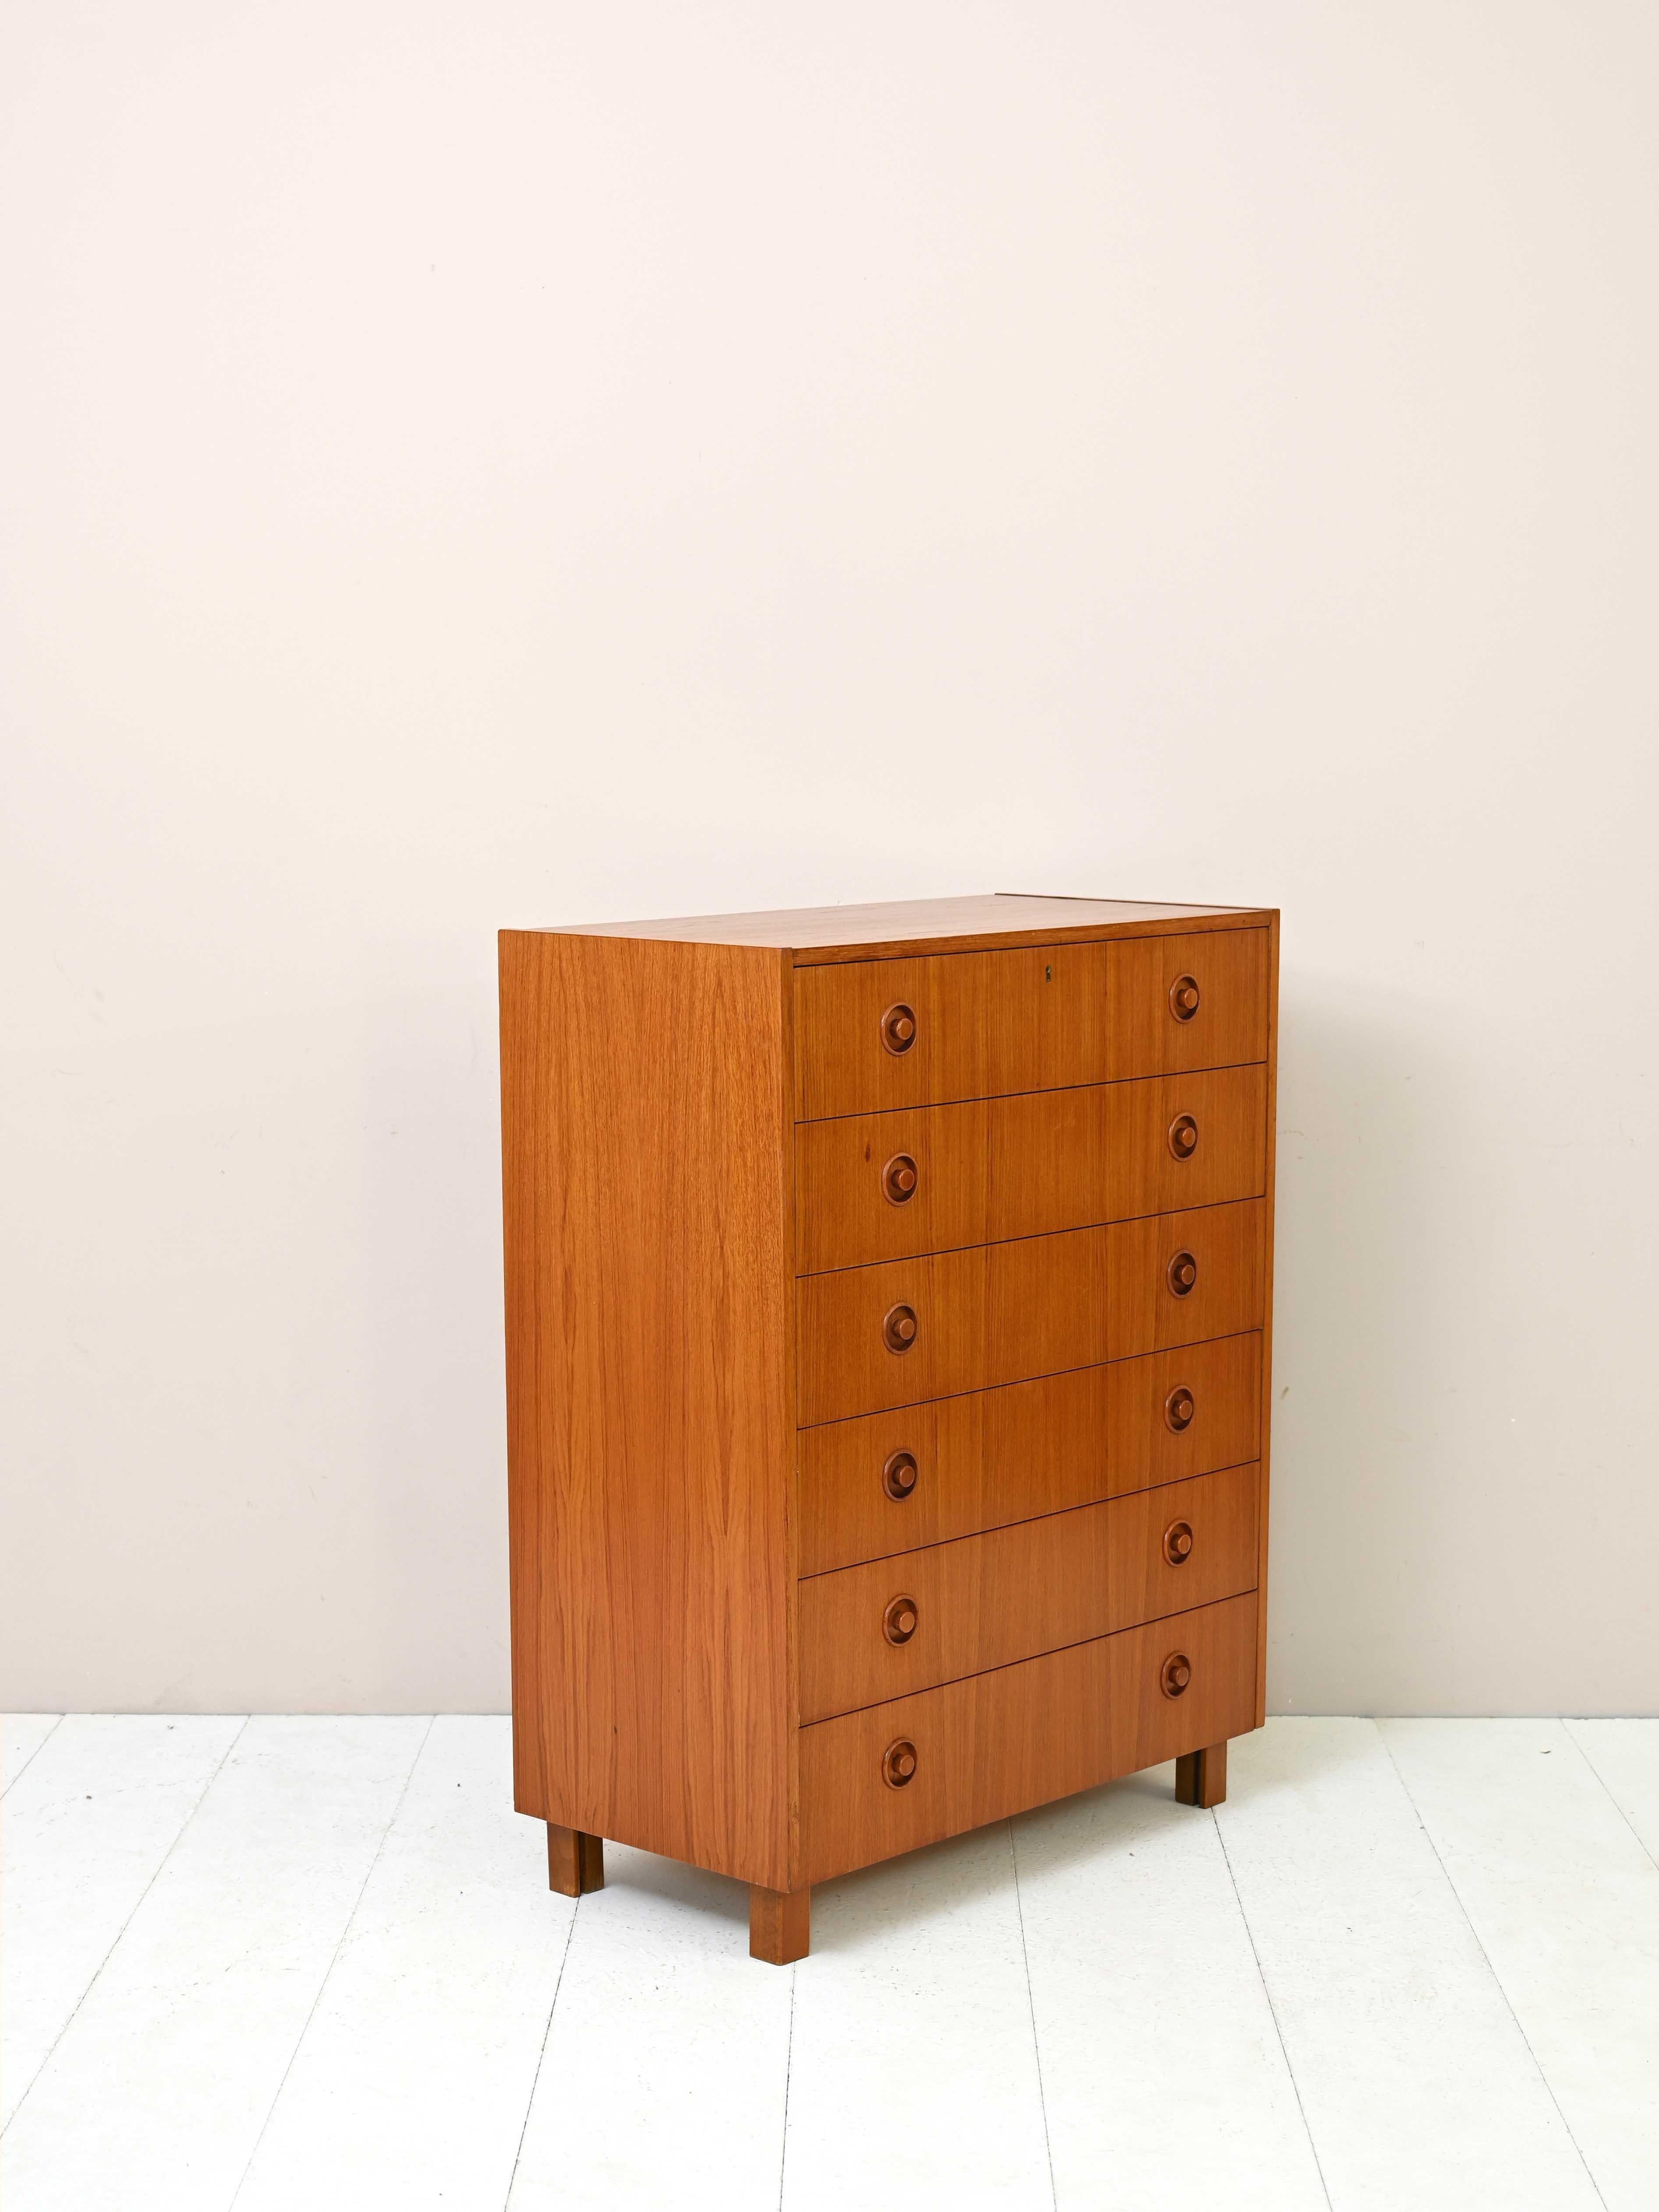 Scandinavian Modern Tall Teak Chest of Drawers with Wooden Knobs For Sale